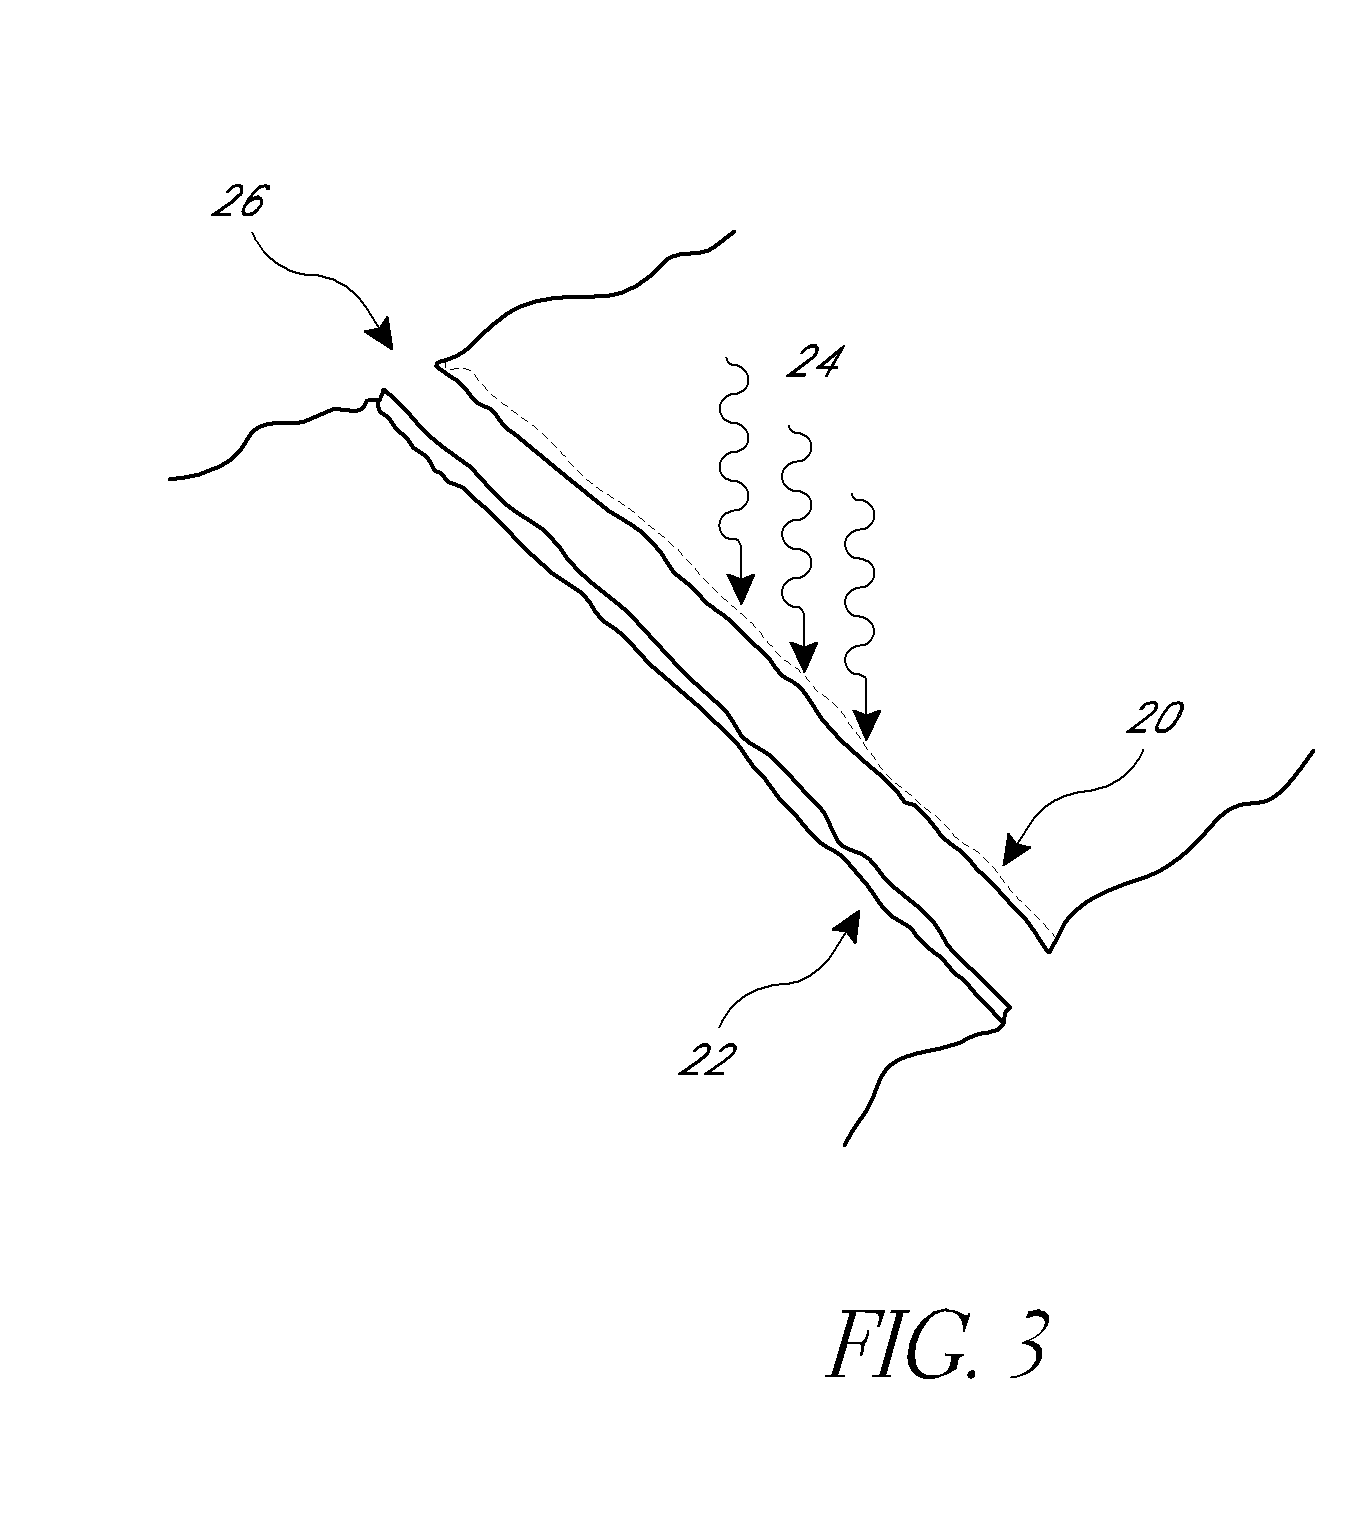 Methods of light treatment of wounds to reduce scar formation